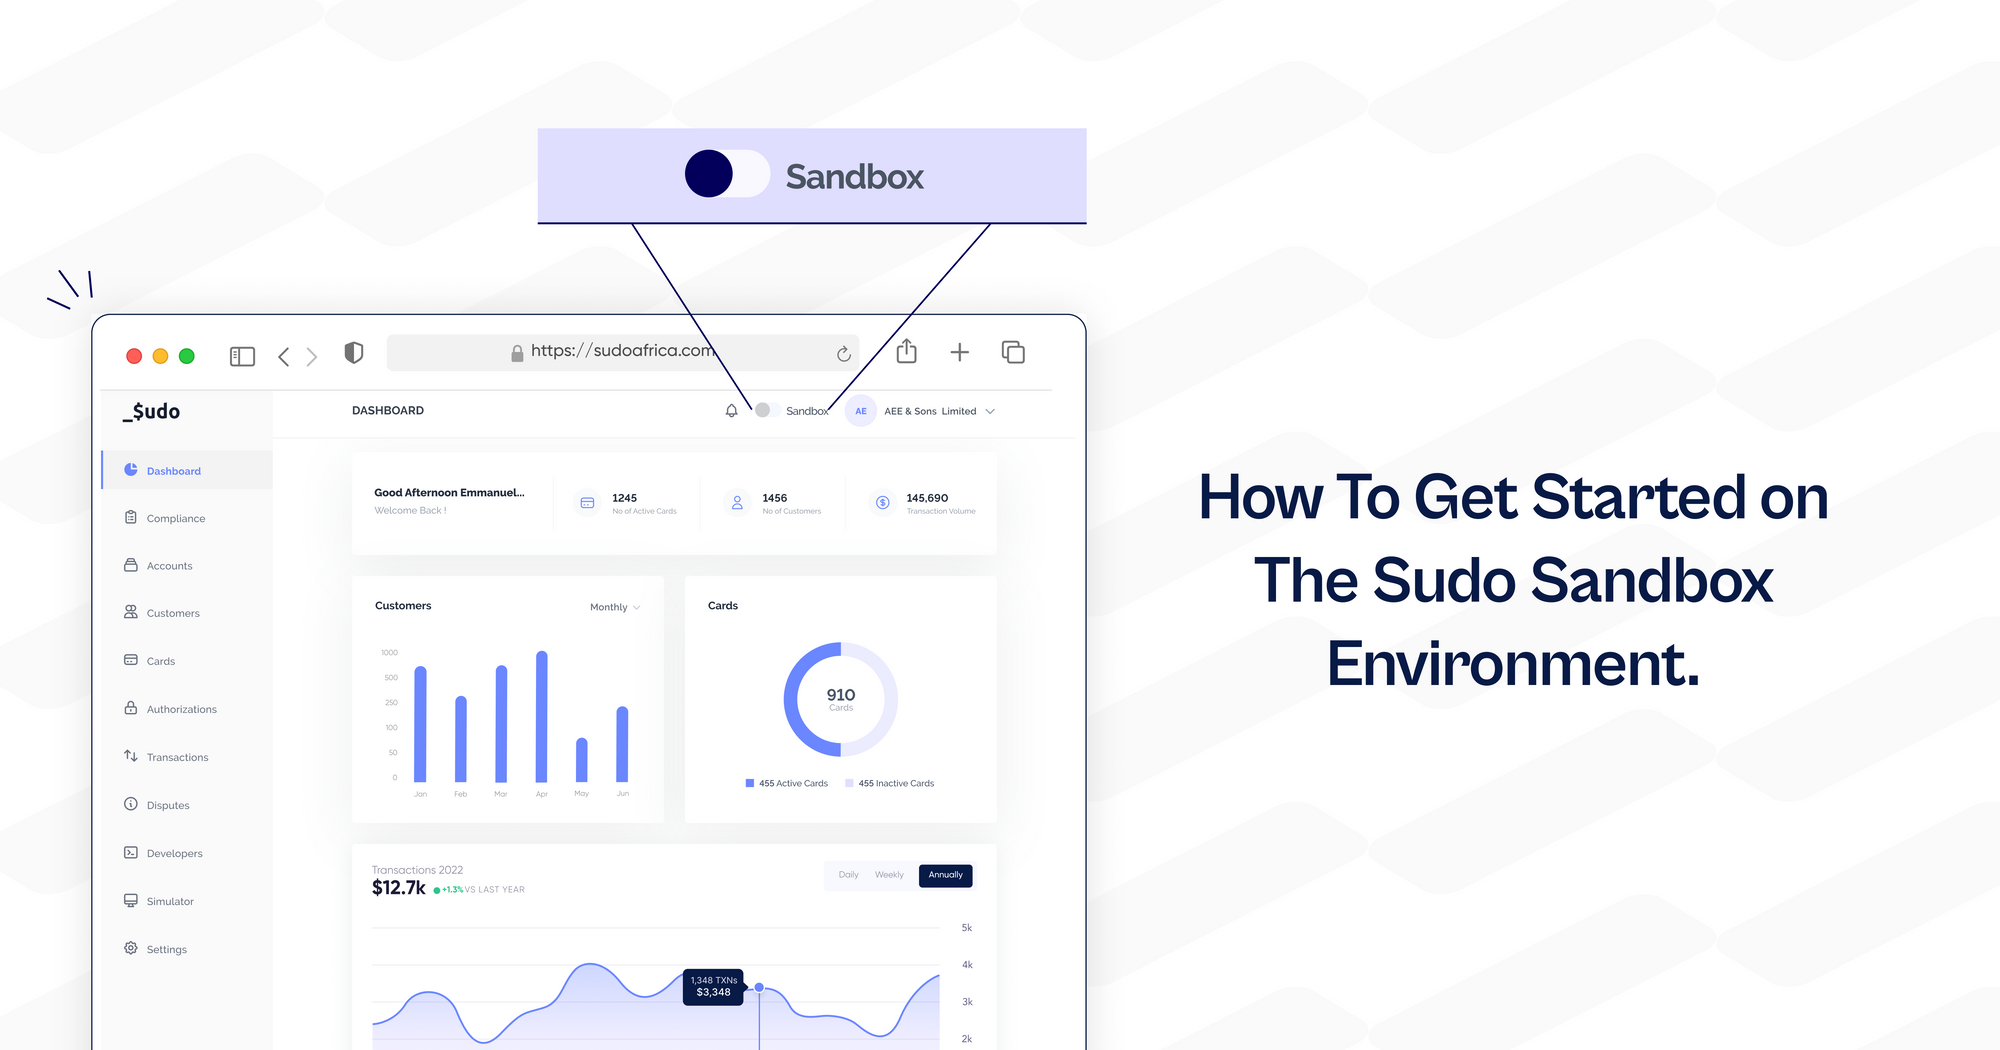 How To Get Started on The Sudo Sandbox Environment